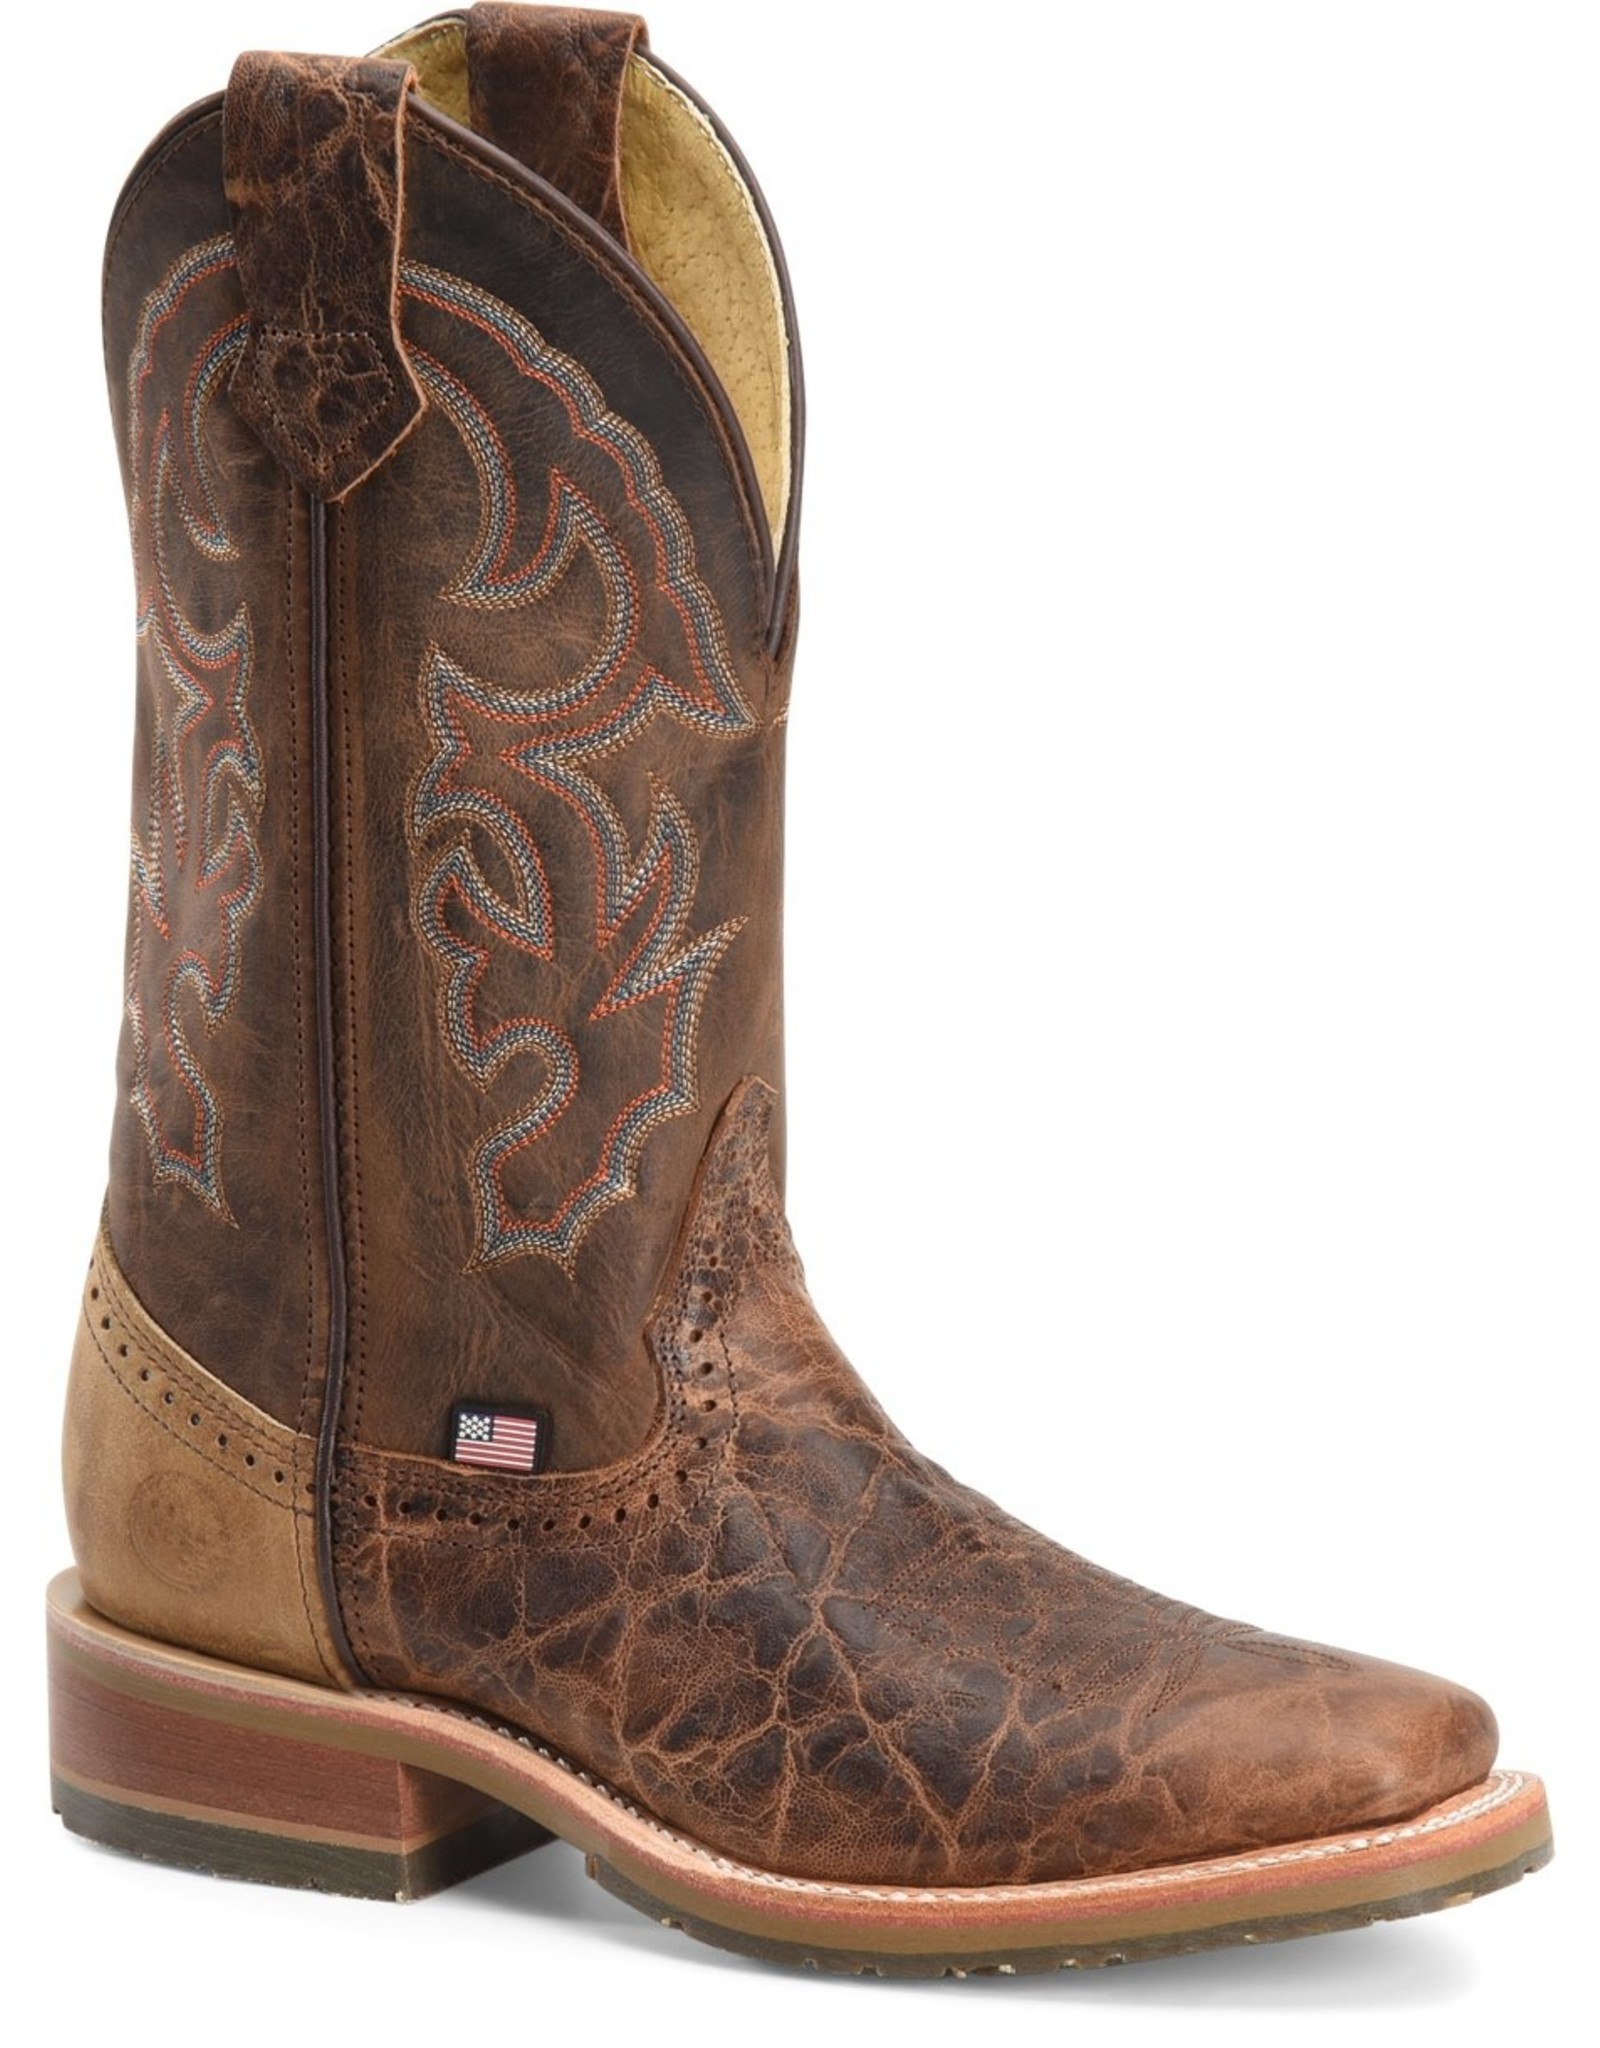 Boots-Men DOUBLE H Harshaw DH4645